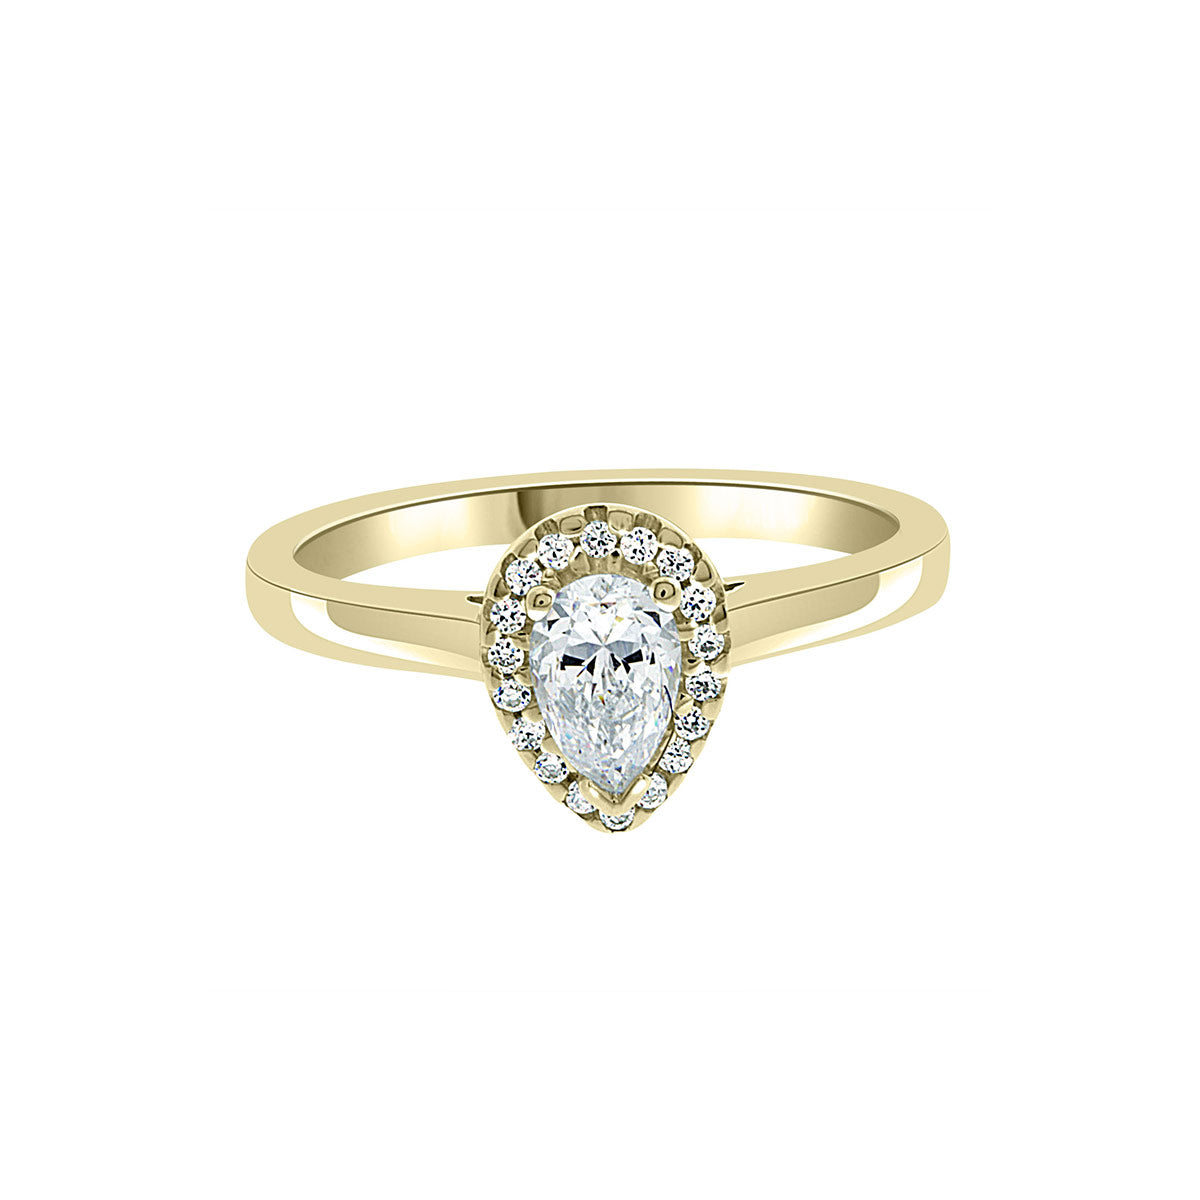 Vintage Engagement Ring with Pear Shape Diamond in yellow gold